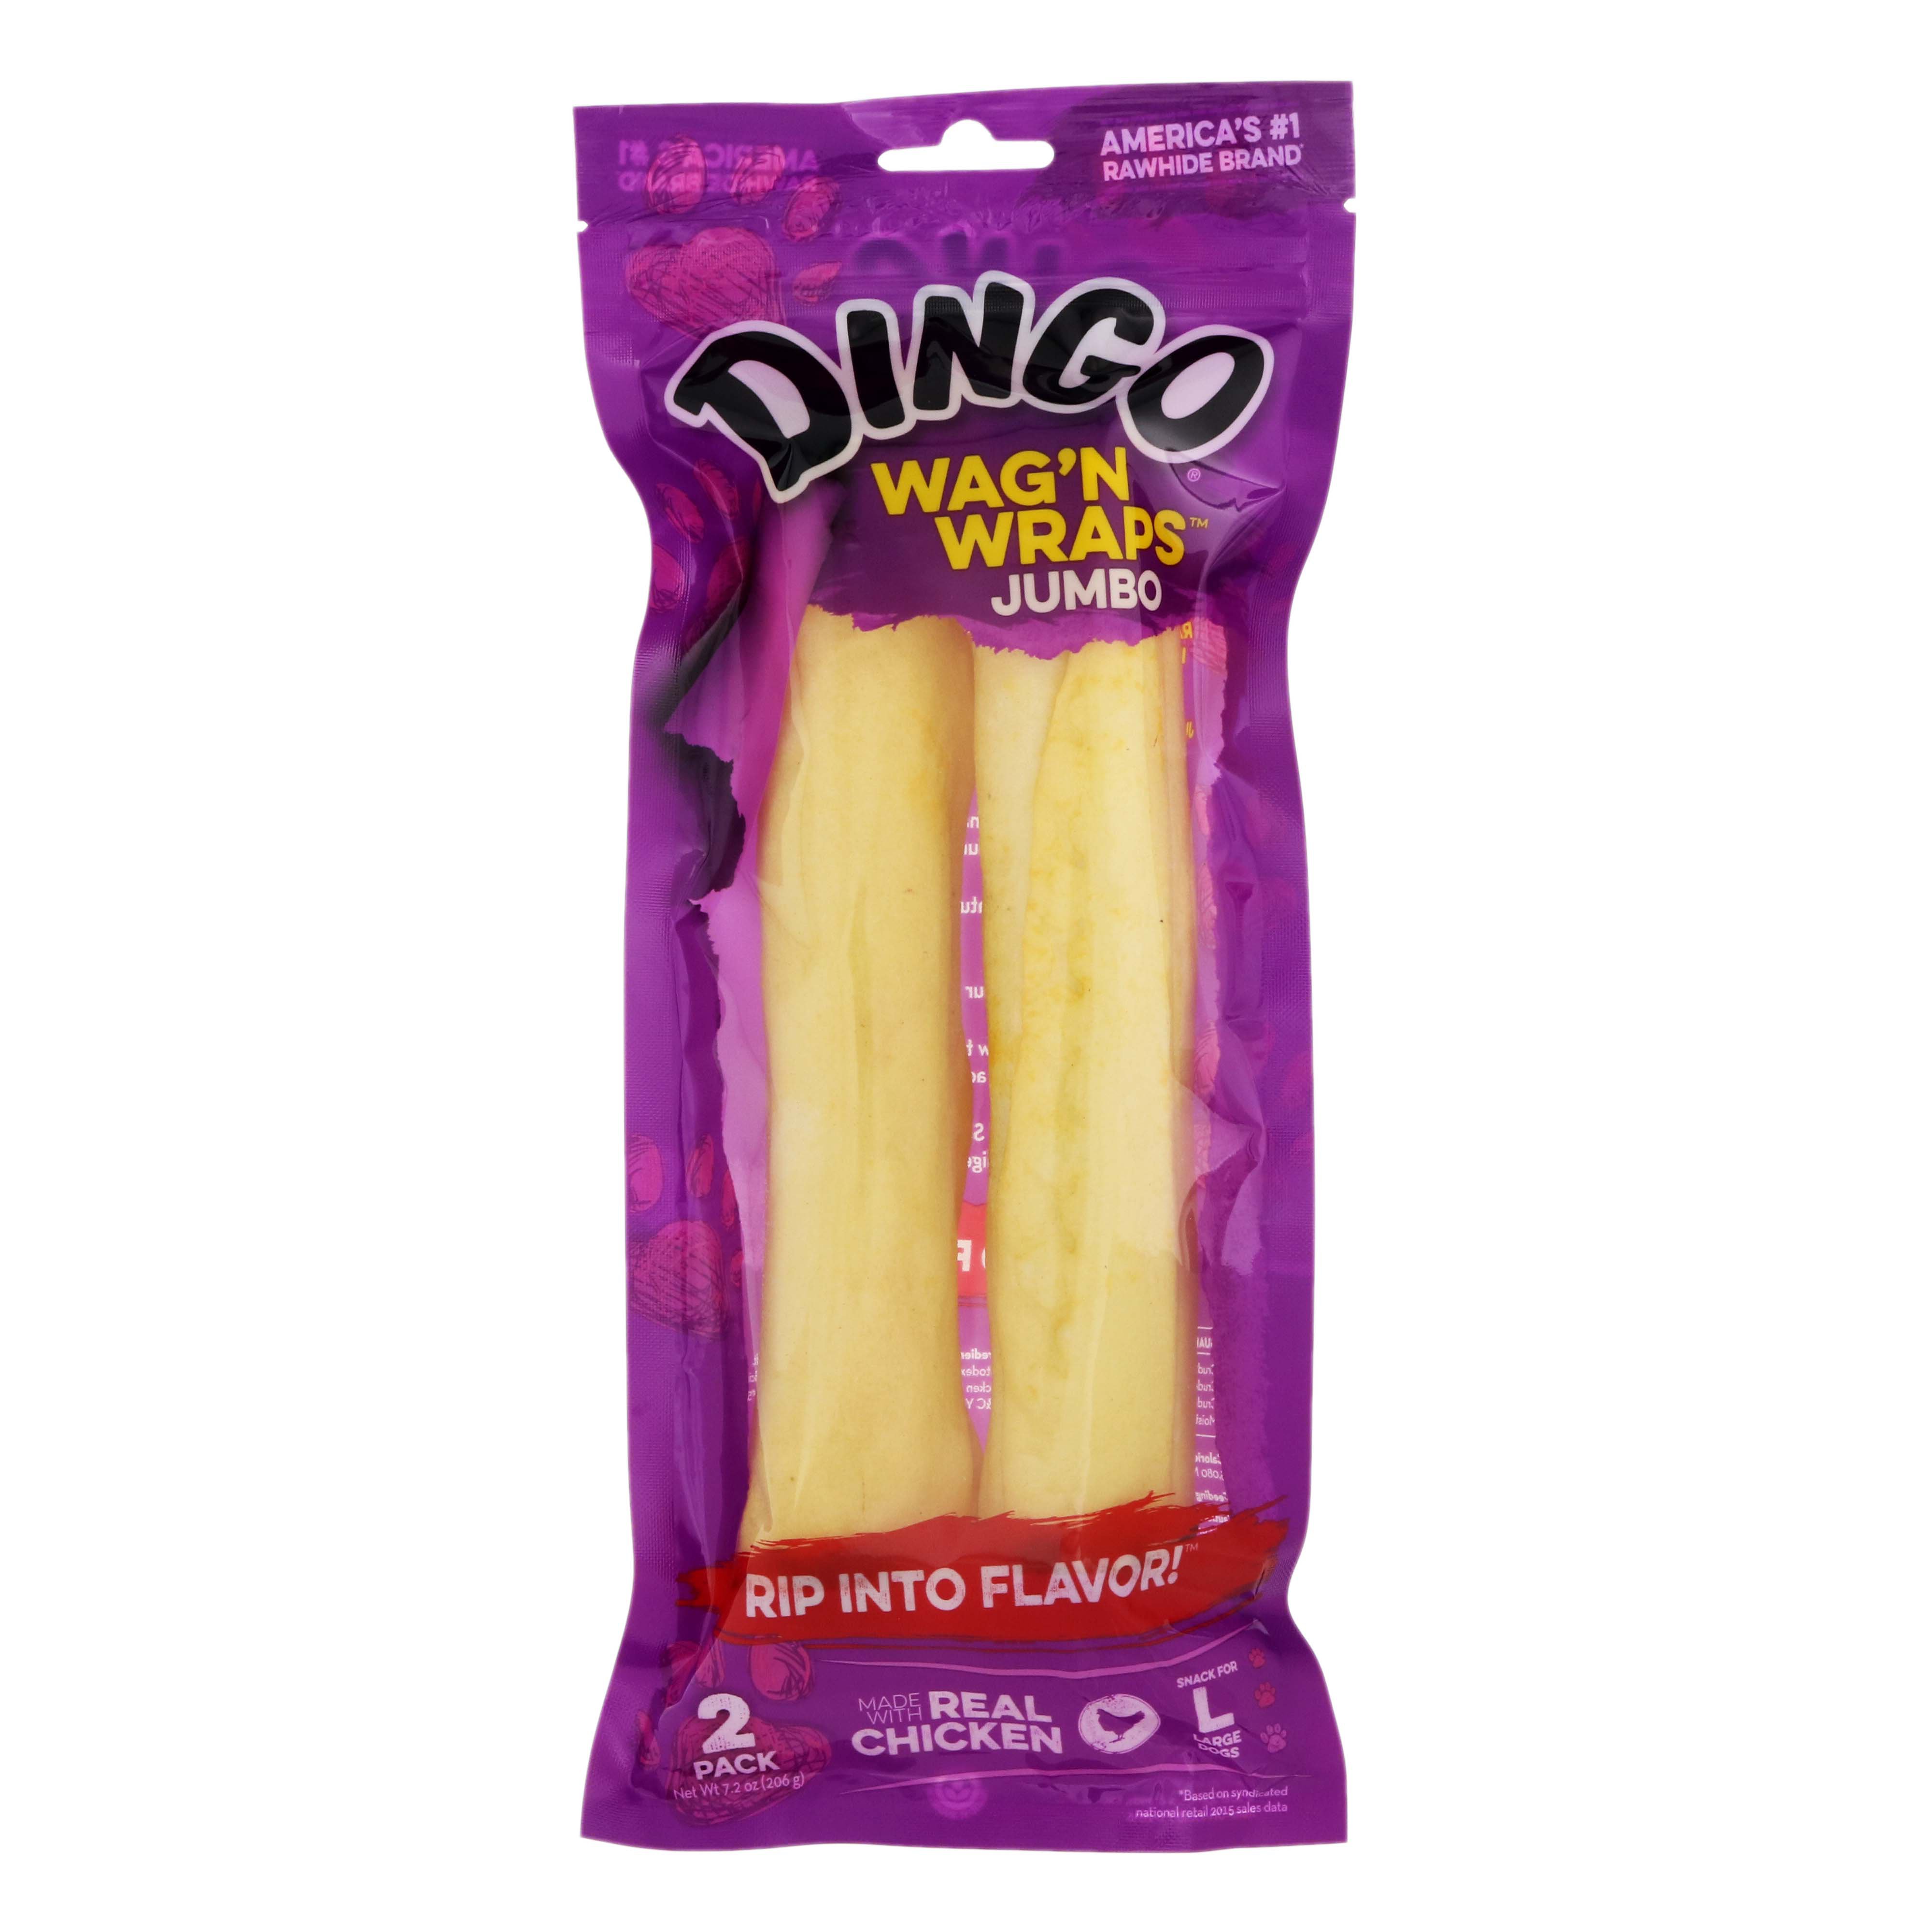 Dingo Wag N Wraps Chicken Jumbo Shop Dogs At H E B